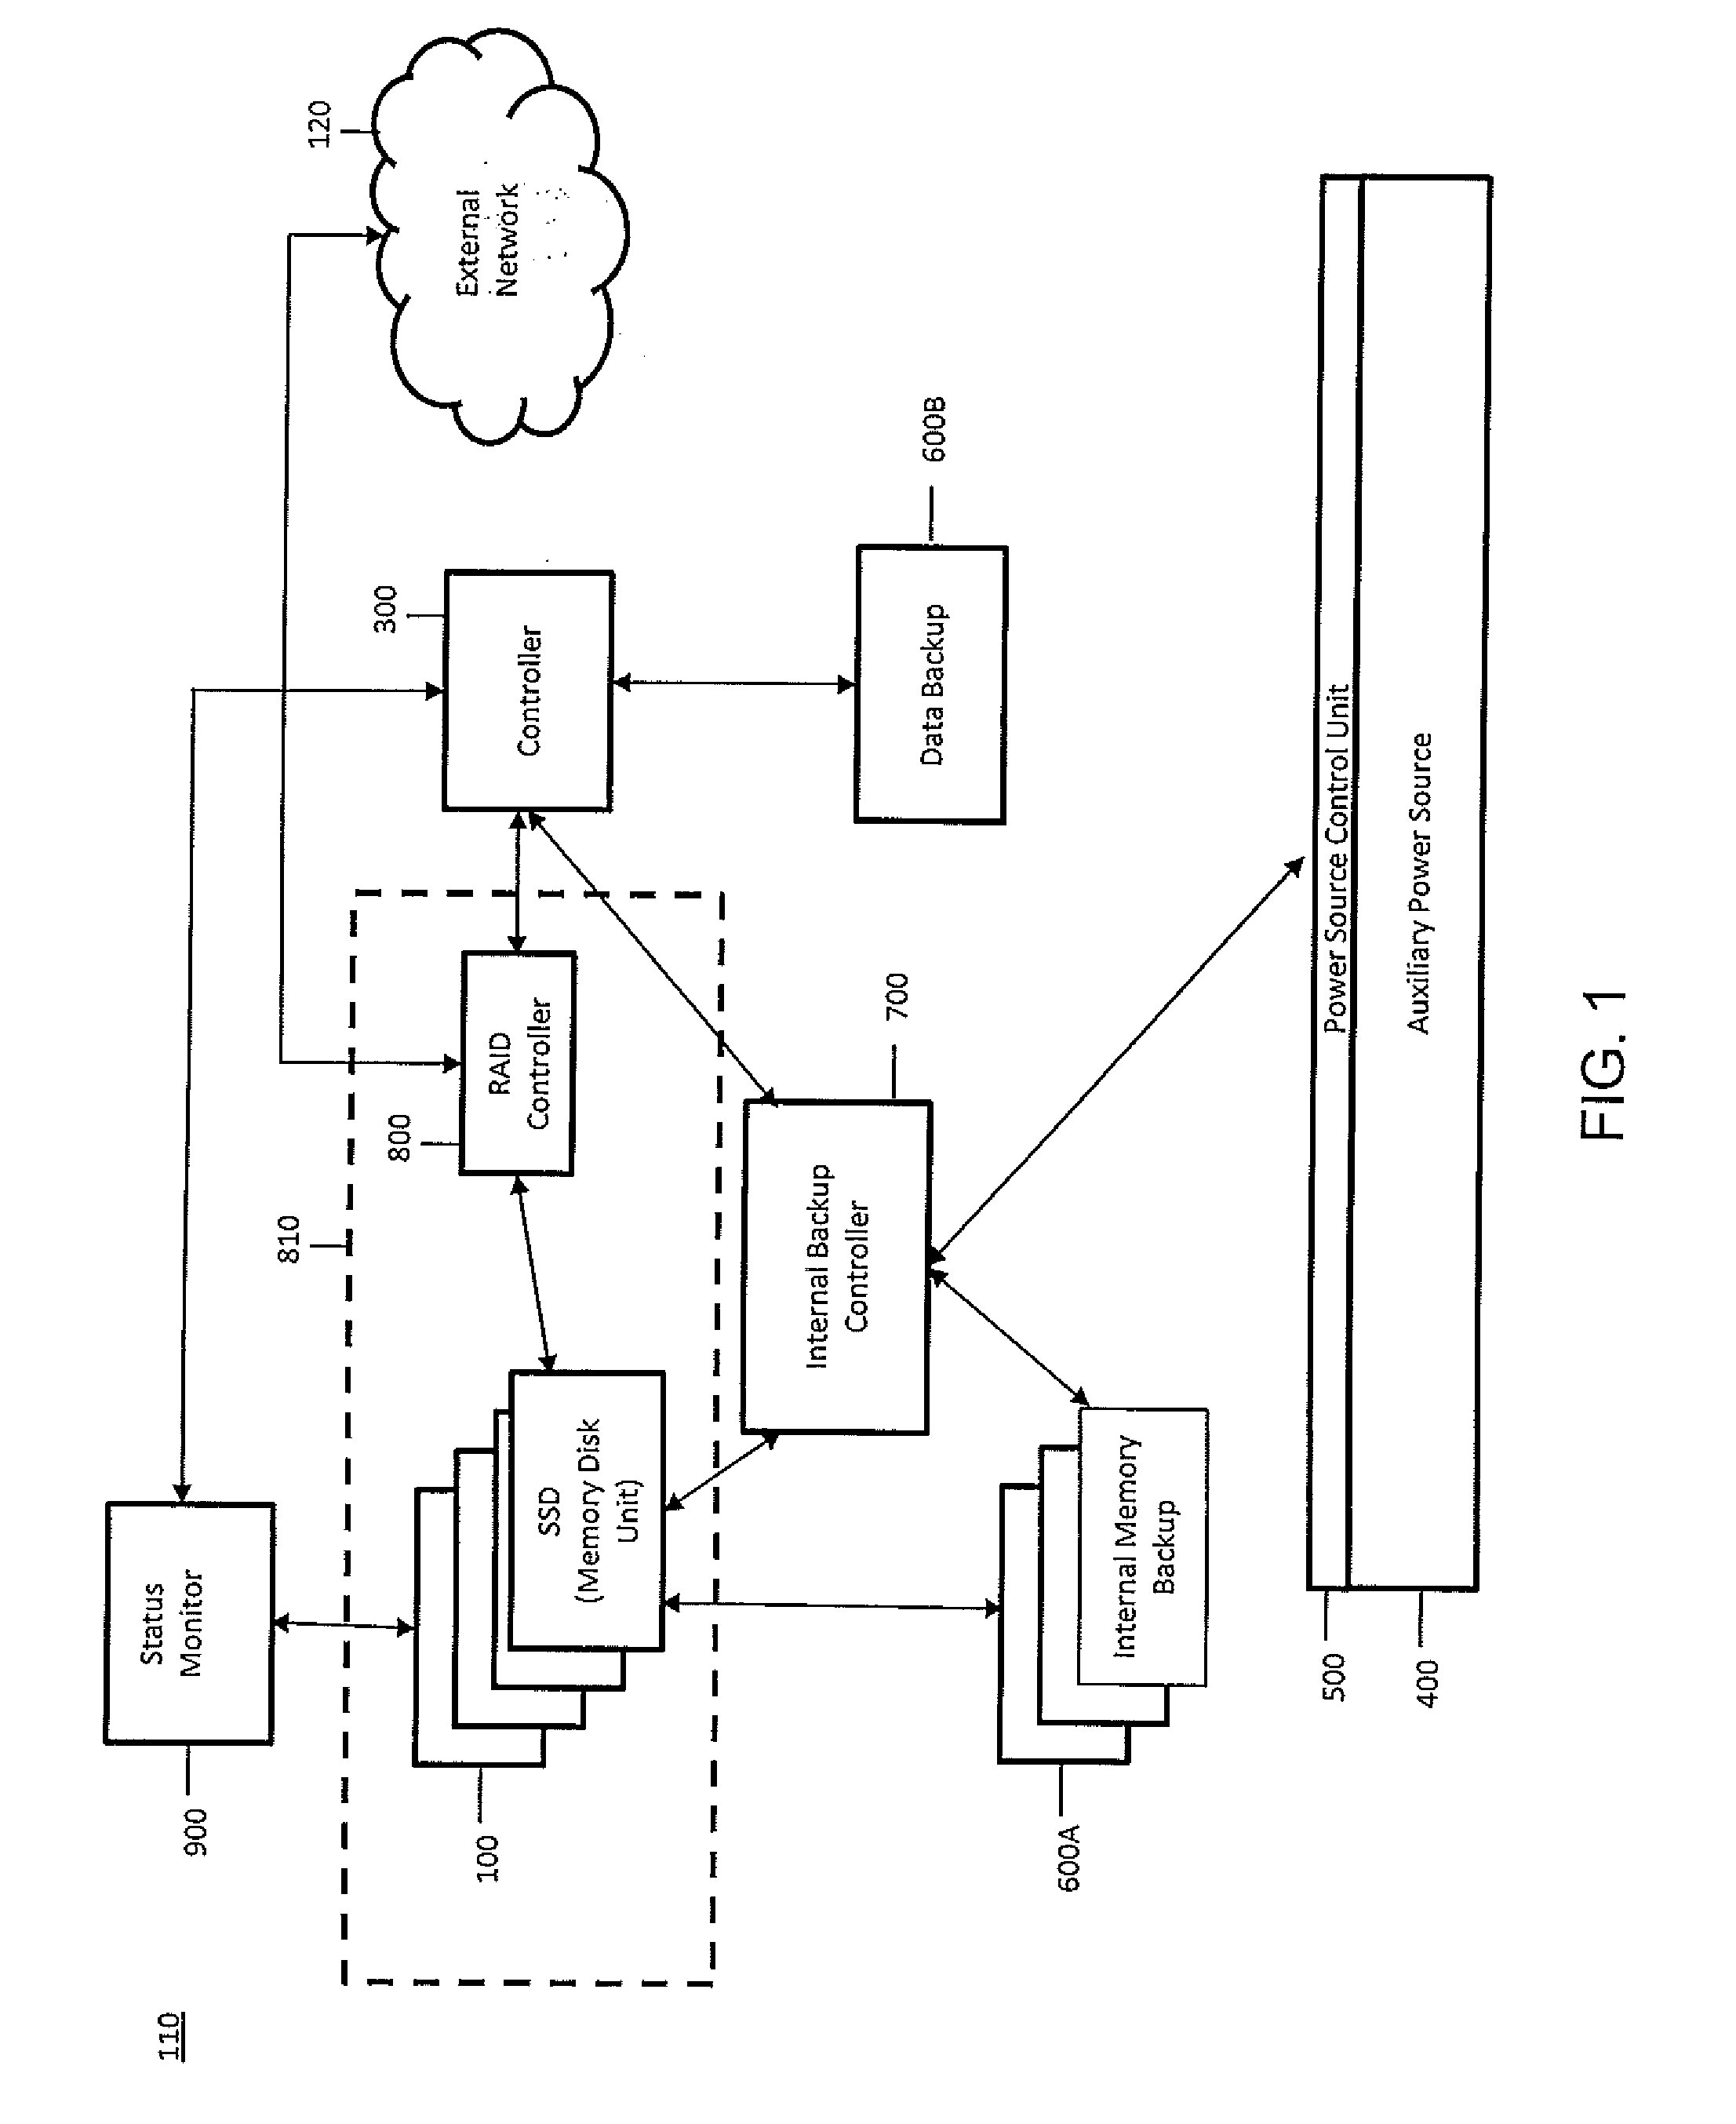 Network-capable raid controller for a semiconductor storage device